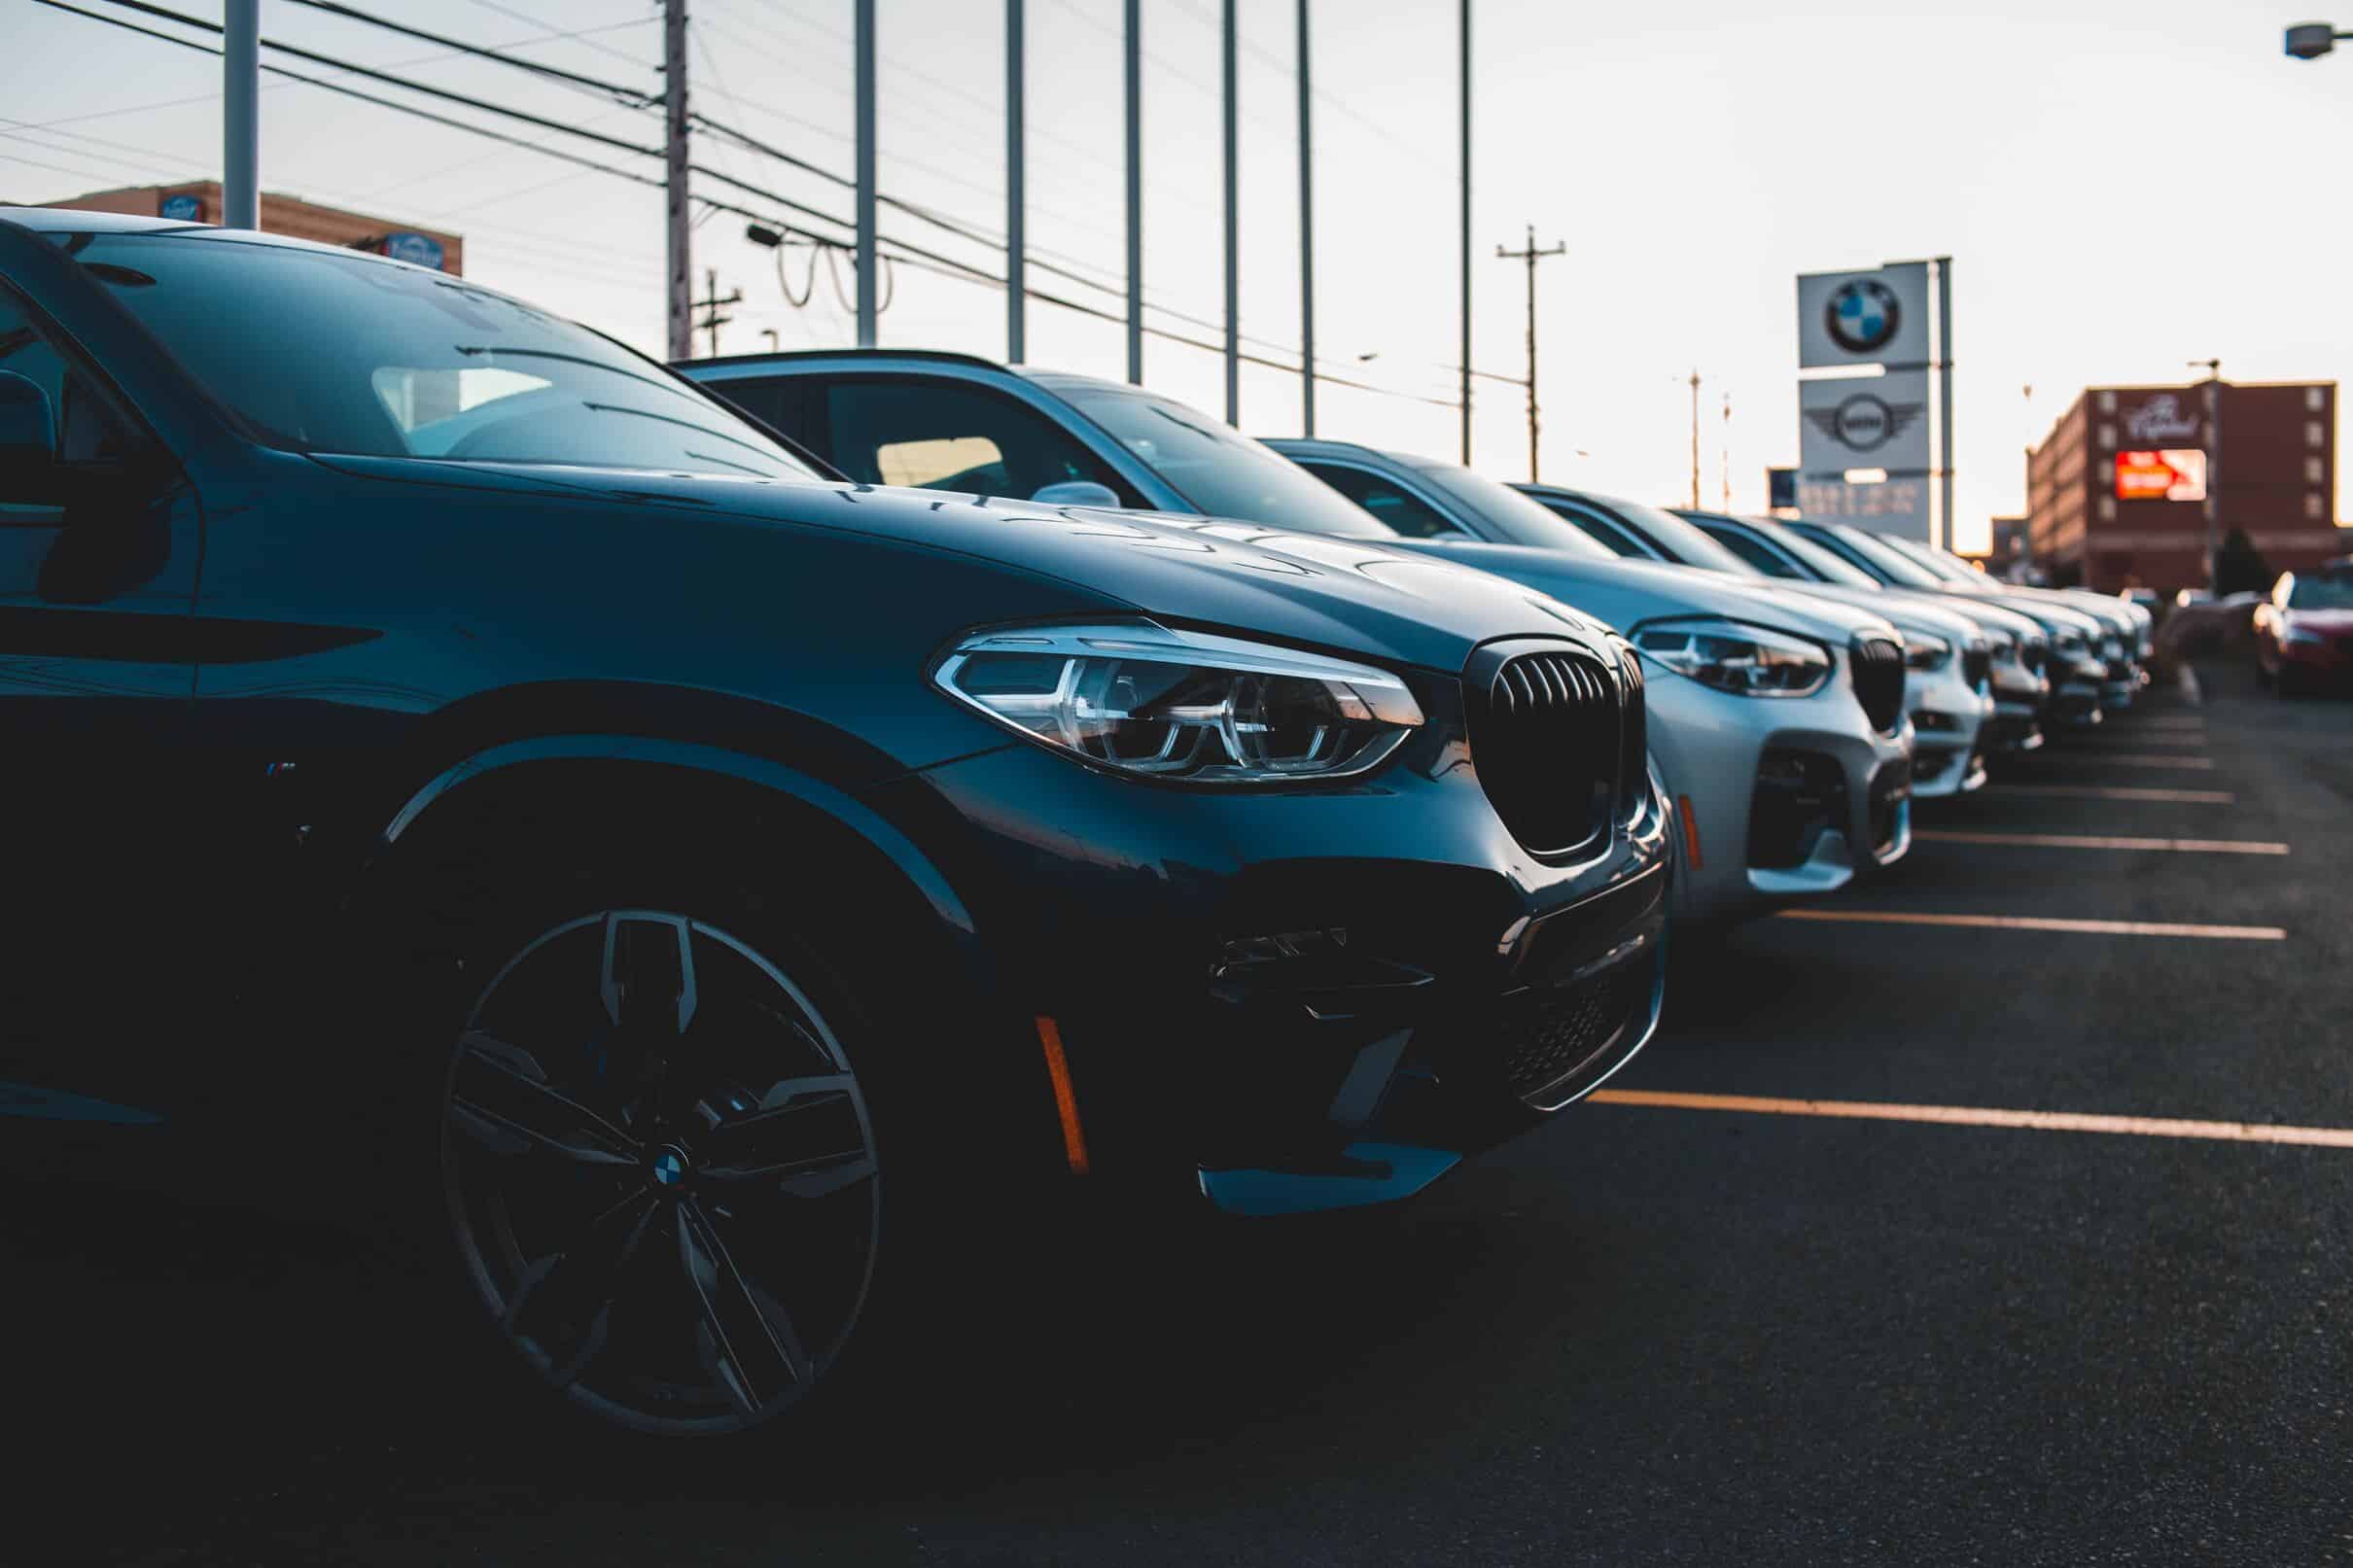 A thriving car dealership with a diverse selection of vehicles on display.